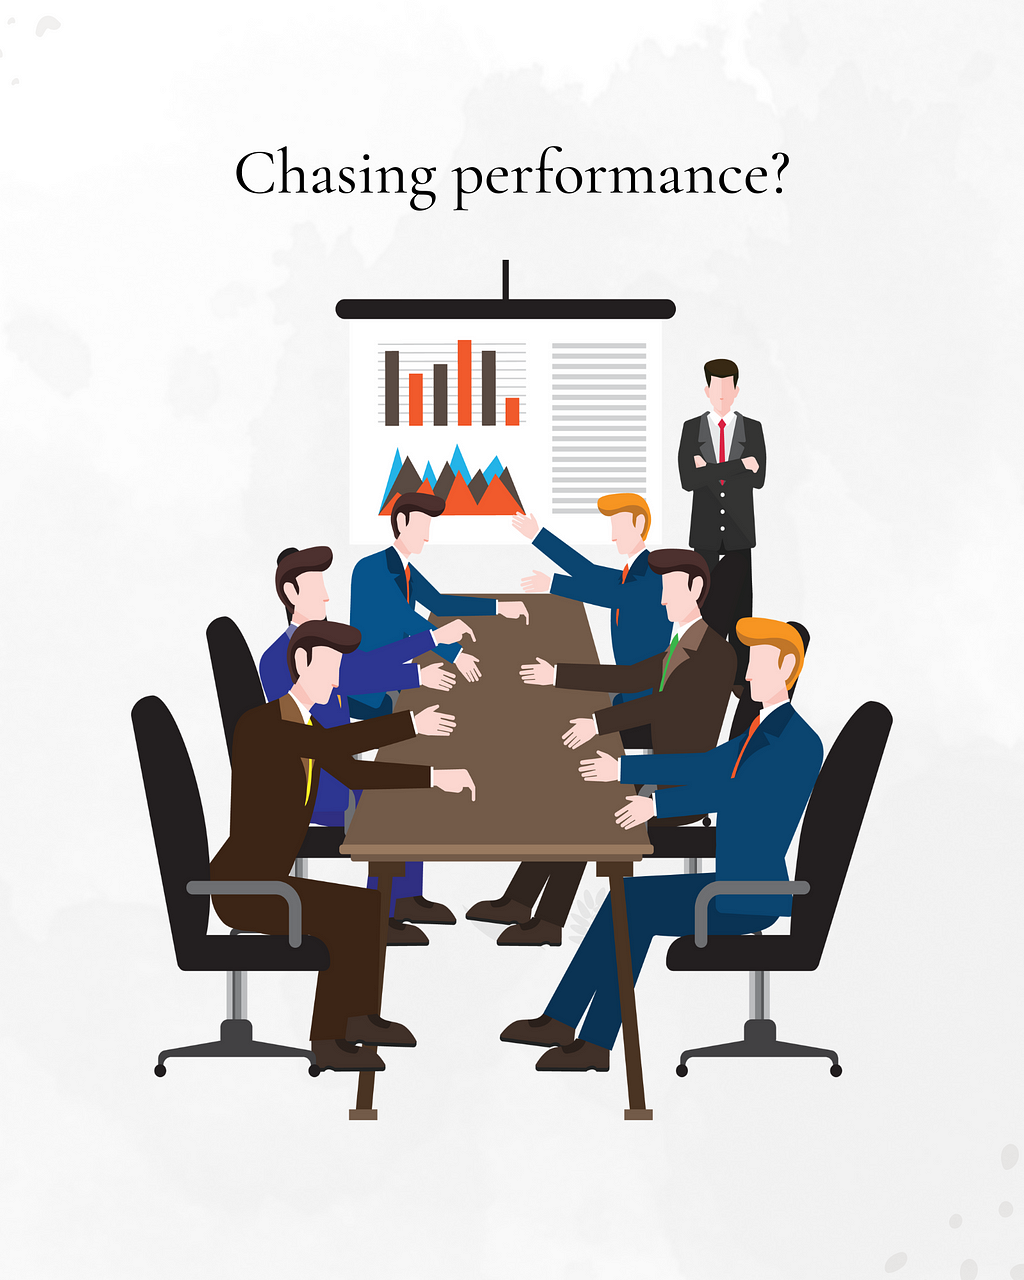 A typical office meeting is shown with a man standing at the head of the table, presenting statistics with bar graphs. Six people sit around a rectangular table, three on each side, arguing with each other. The text above the image reads “Chasing performance?”